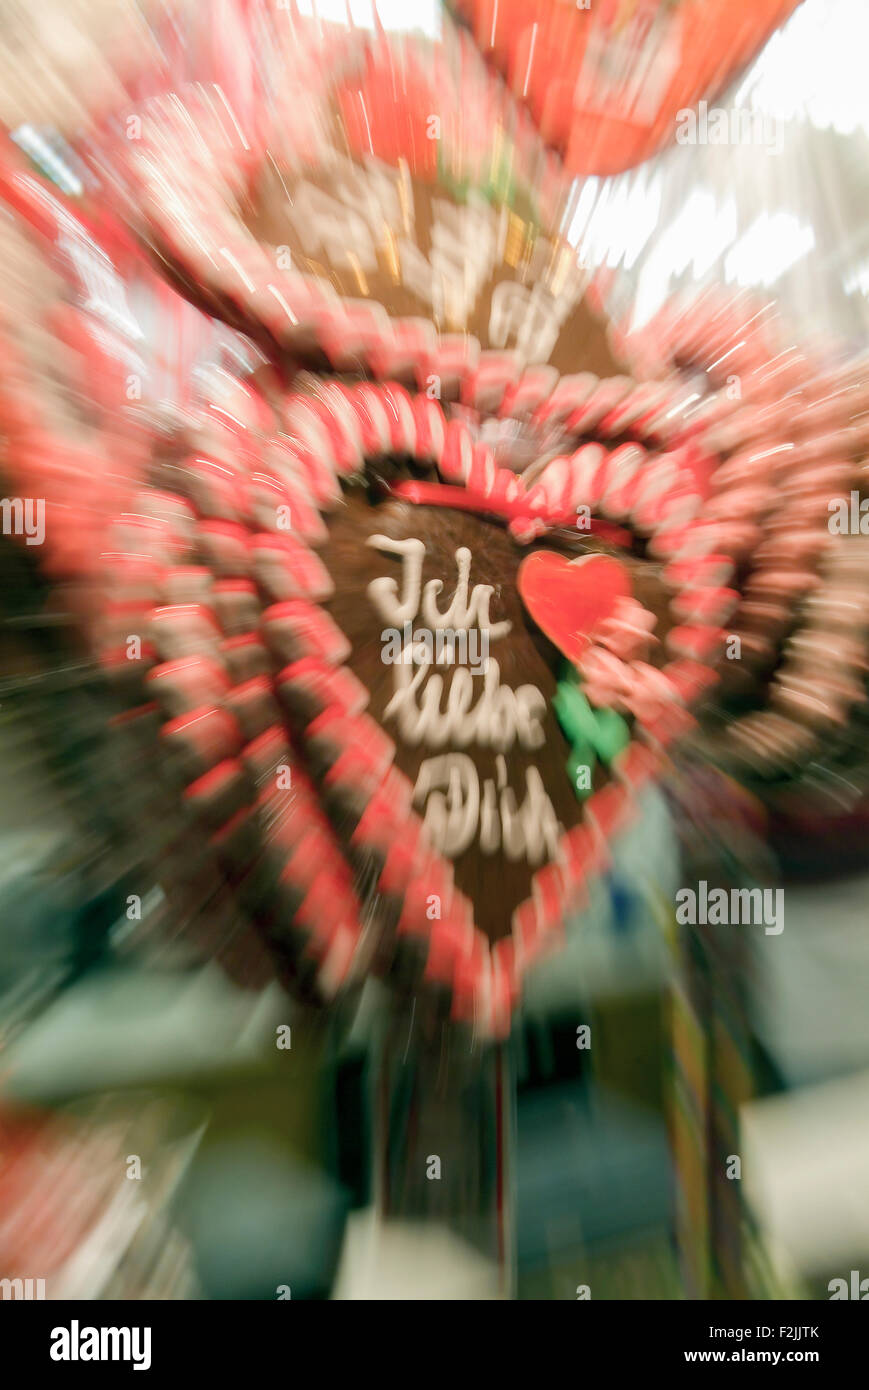 'Ich liebe dich' means I love you on a gingerbread heart on a christmas market, zoomed and blurred, in Germany Europe Stock Photo